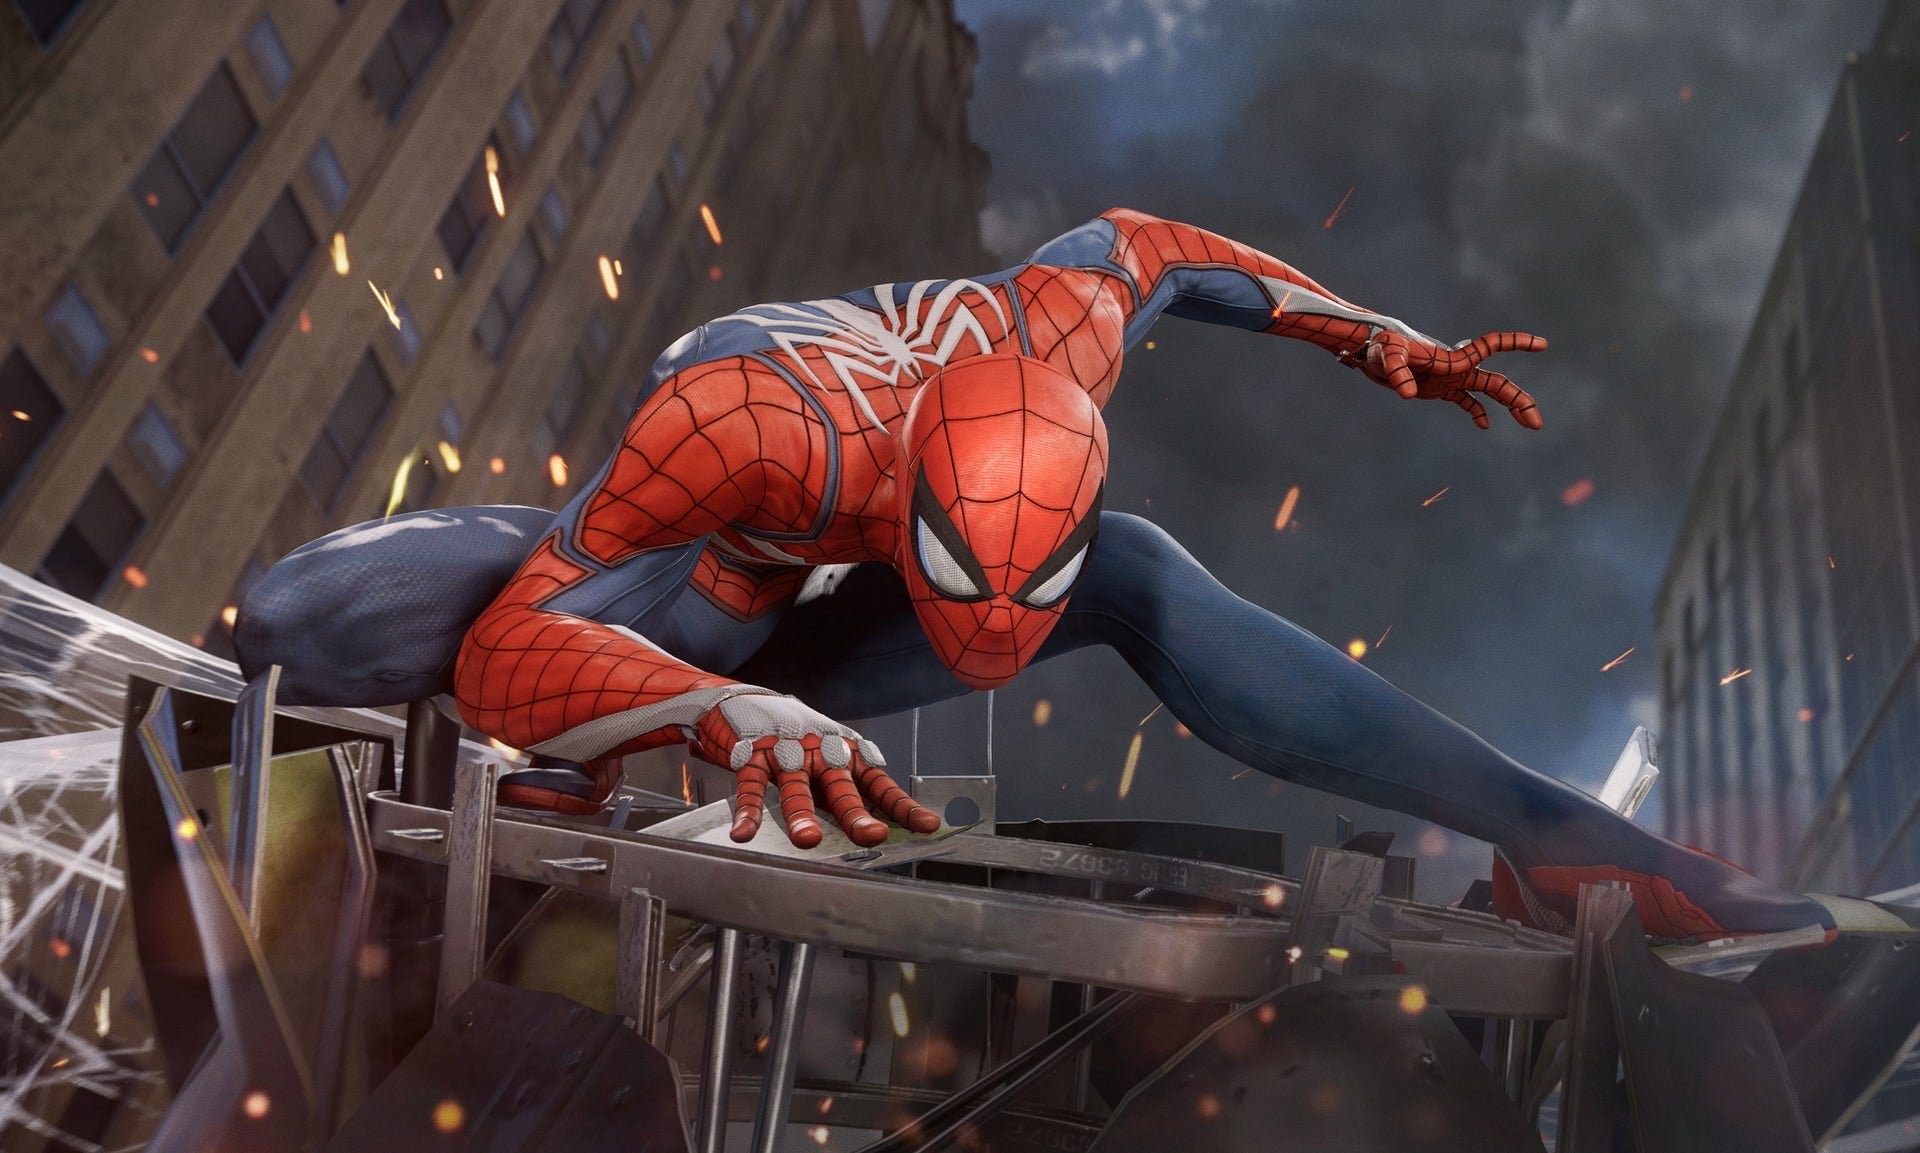 Sony says Spider-Man has power to help them reach 100 million units in console sales by bringing new people gaming | VG247